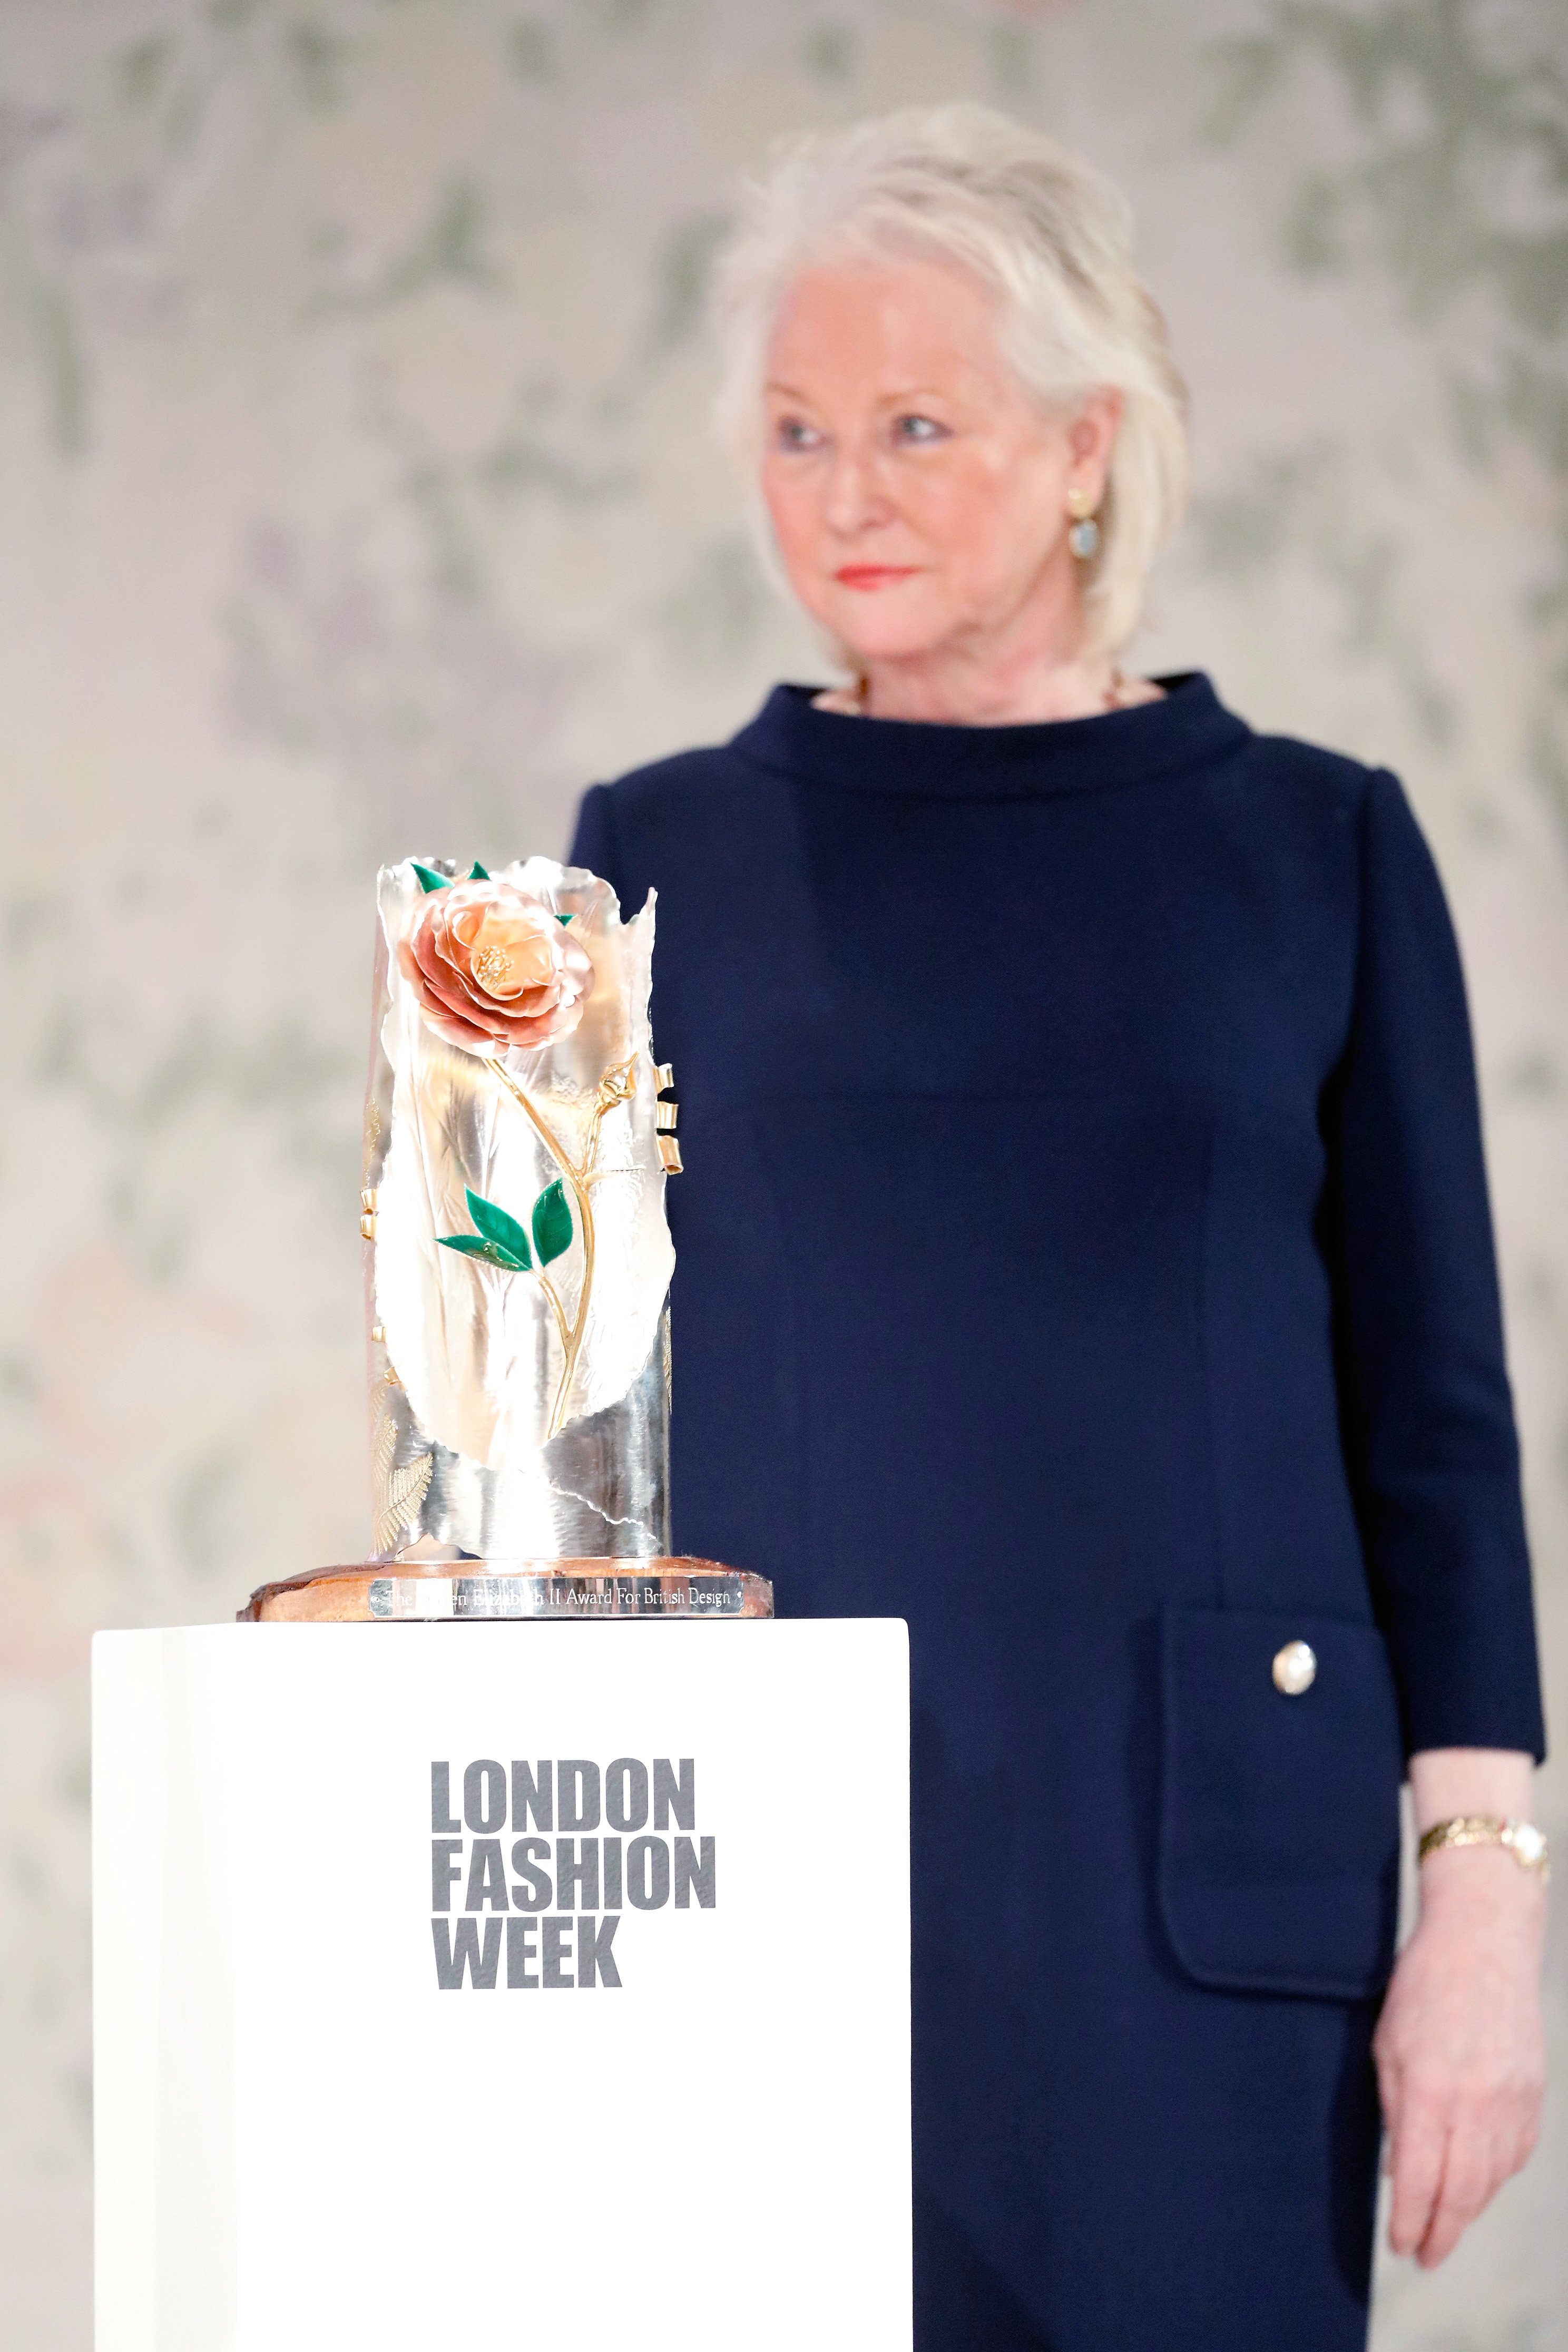 Royal dressmaker Angela Kelly poses with the Inaugural Queen Elizabeth II award for British Design at London Fashion Week on February 20, 2018 in London, England ┃Source: Getty Images